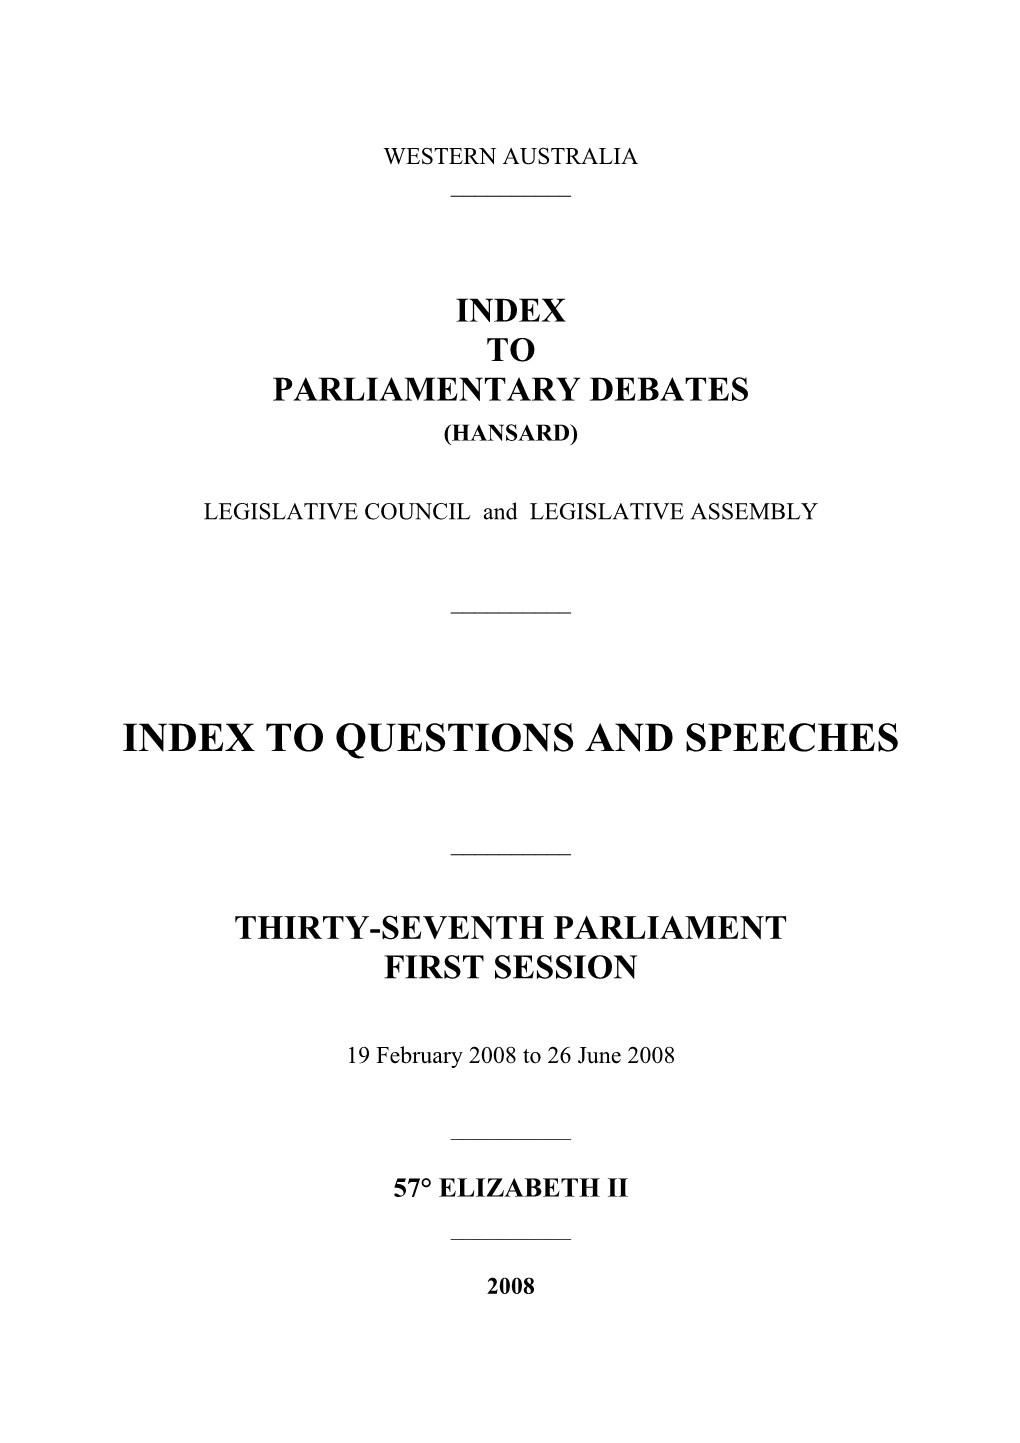 Index to Questions and Speeches